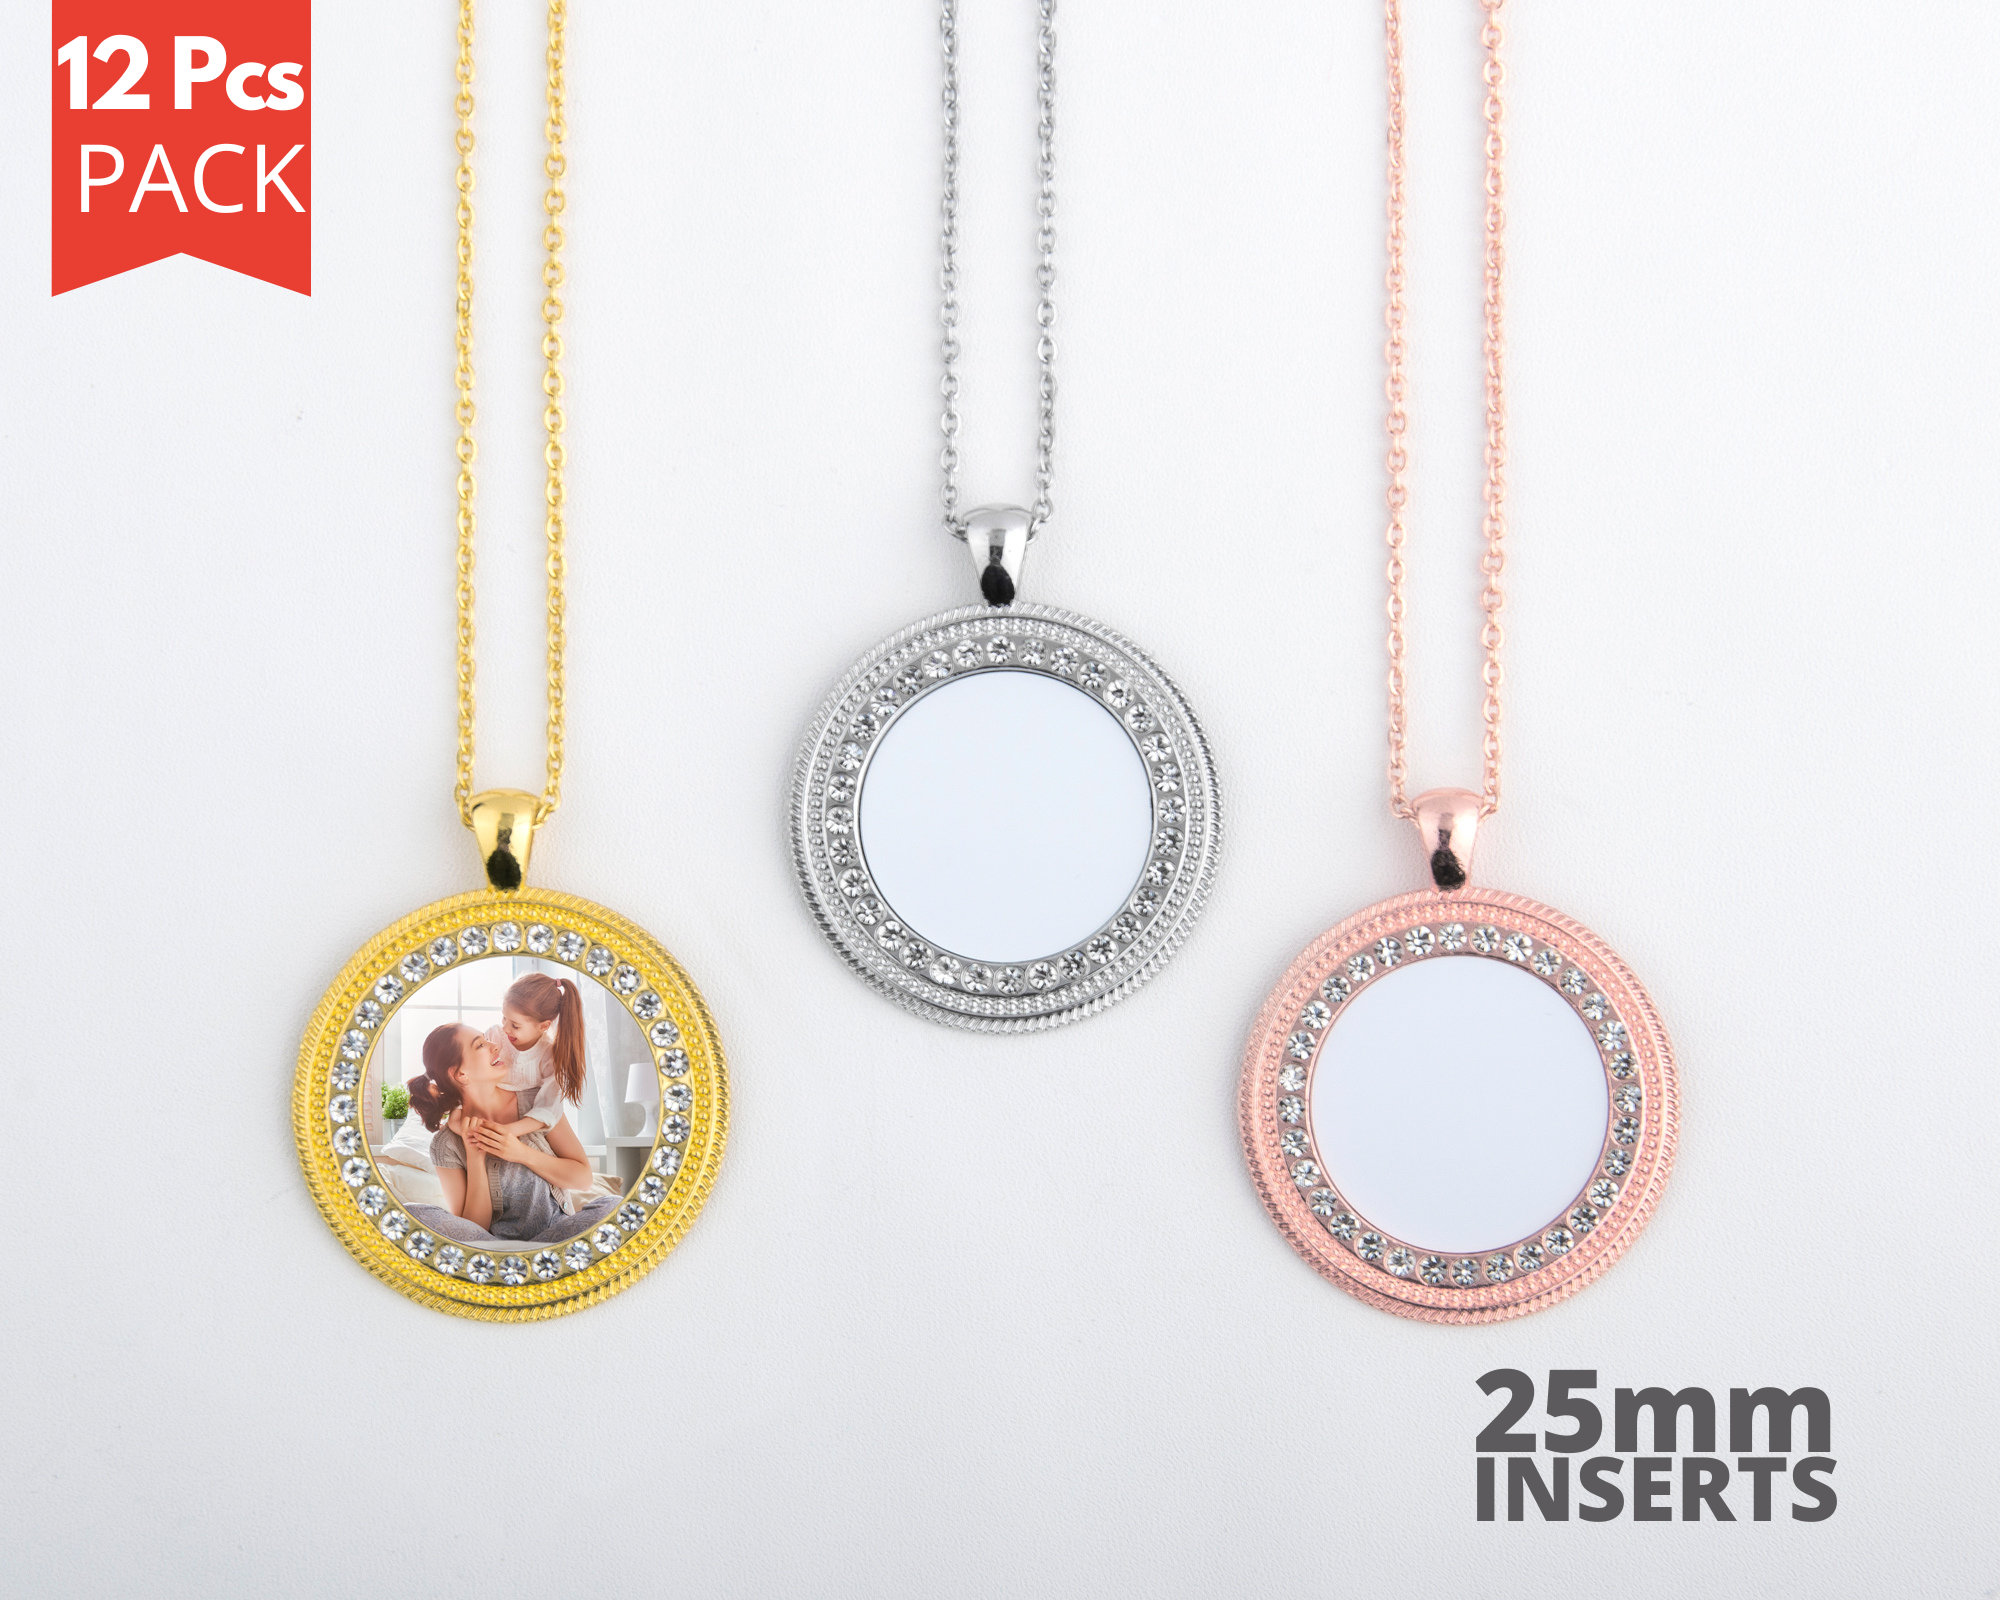 12pcs Sublimation Blank Heart Necklace DIY Personalized